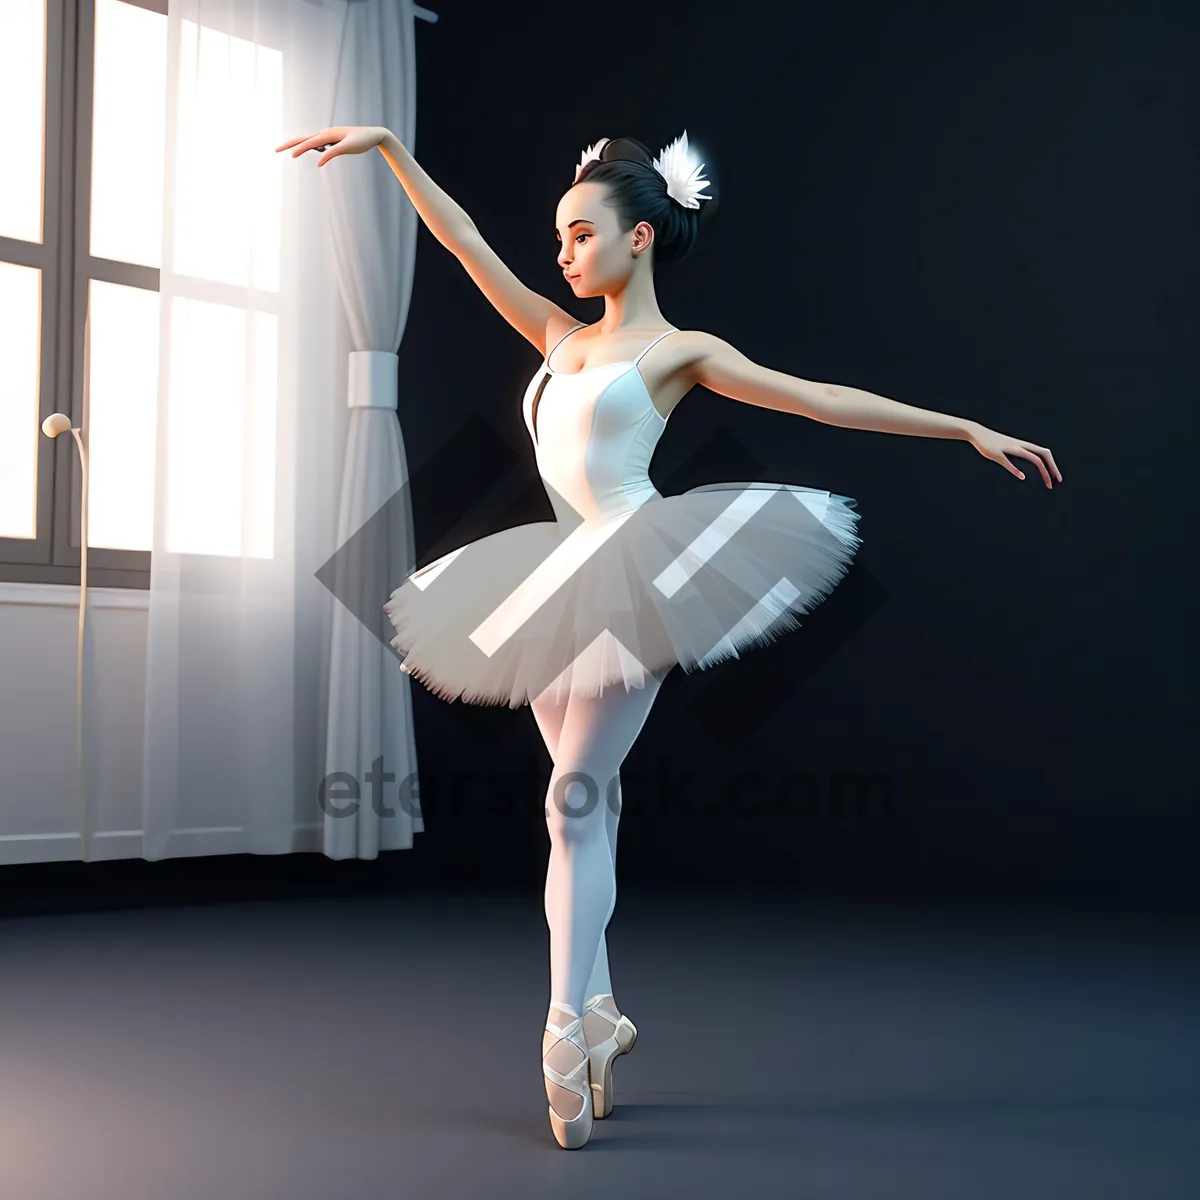 Picture of Elegant Ballet Performance by Attractive Dancer